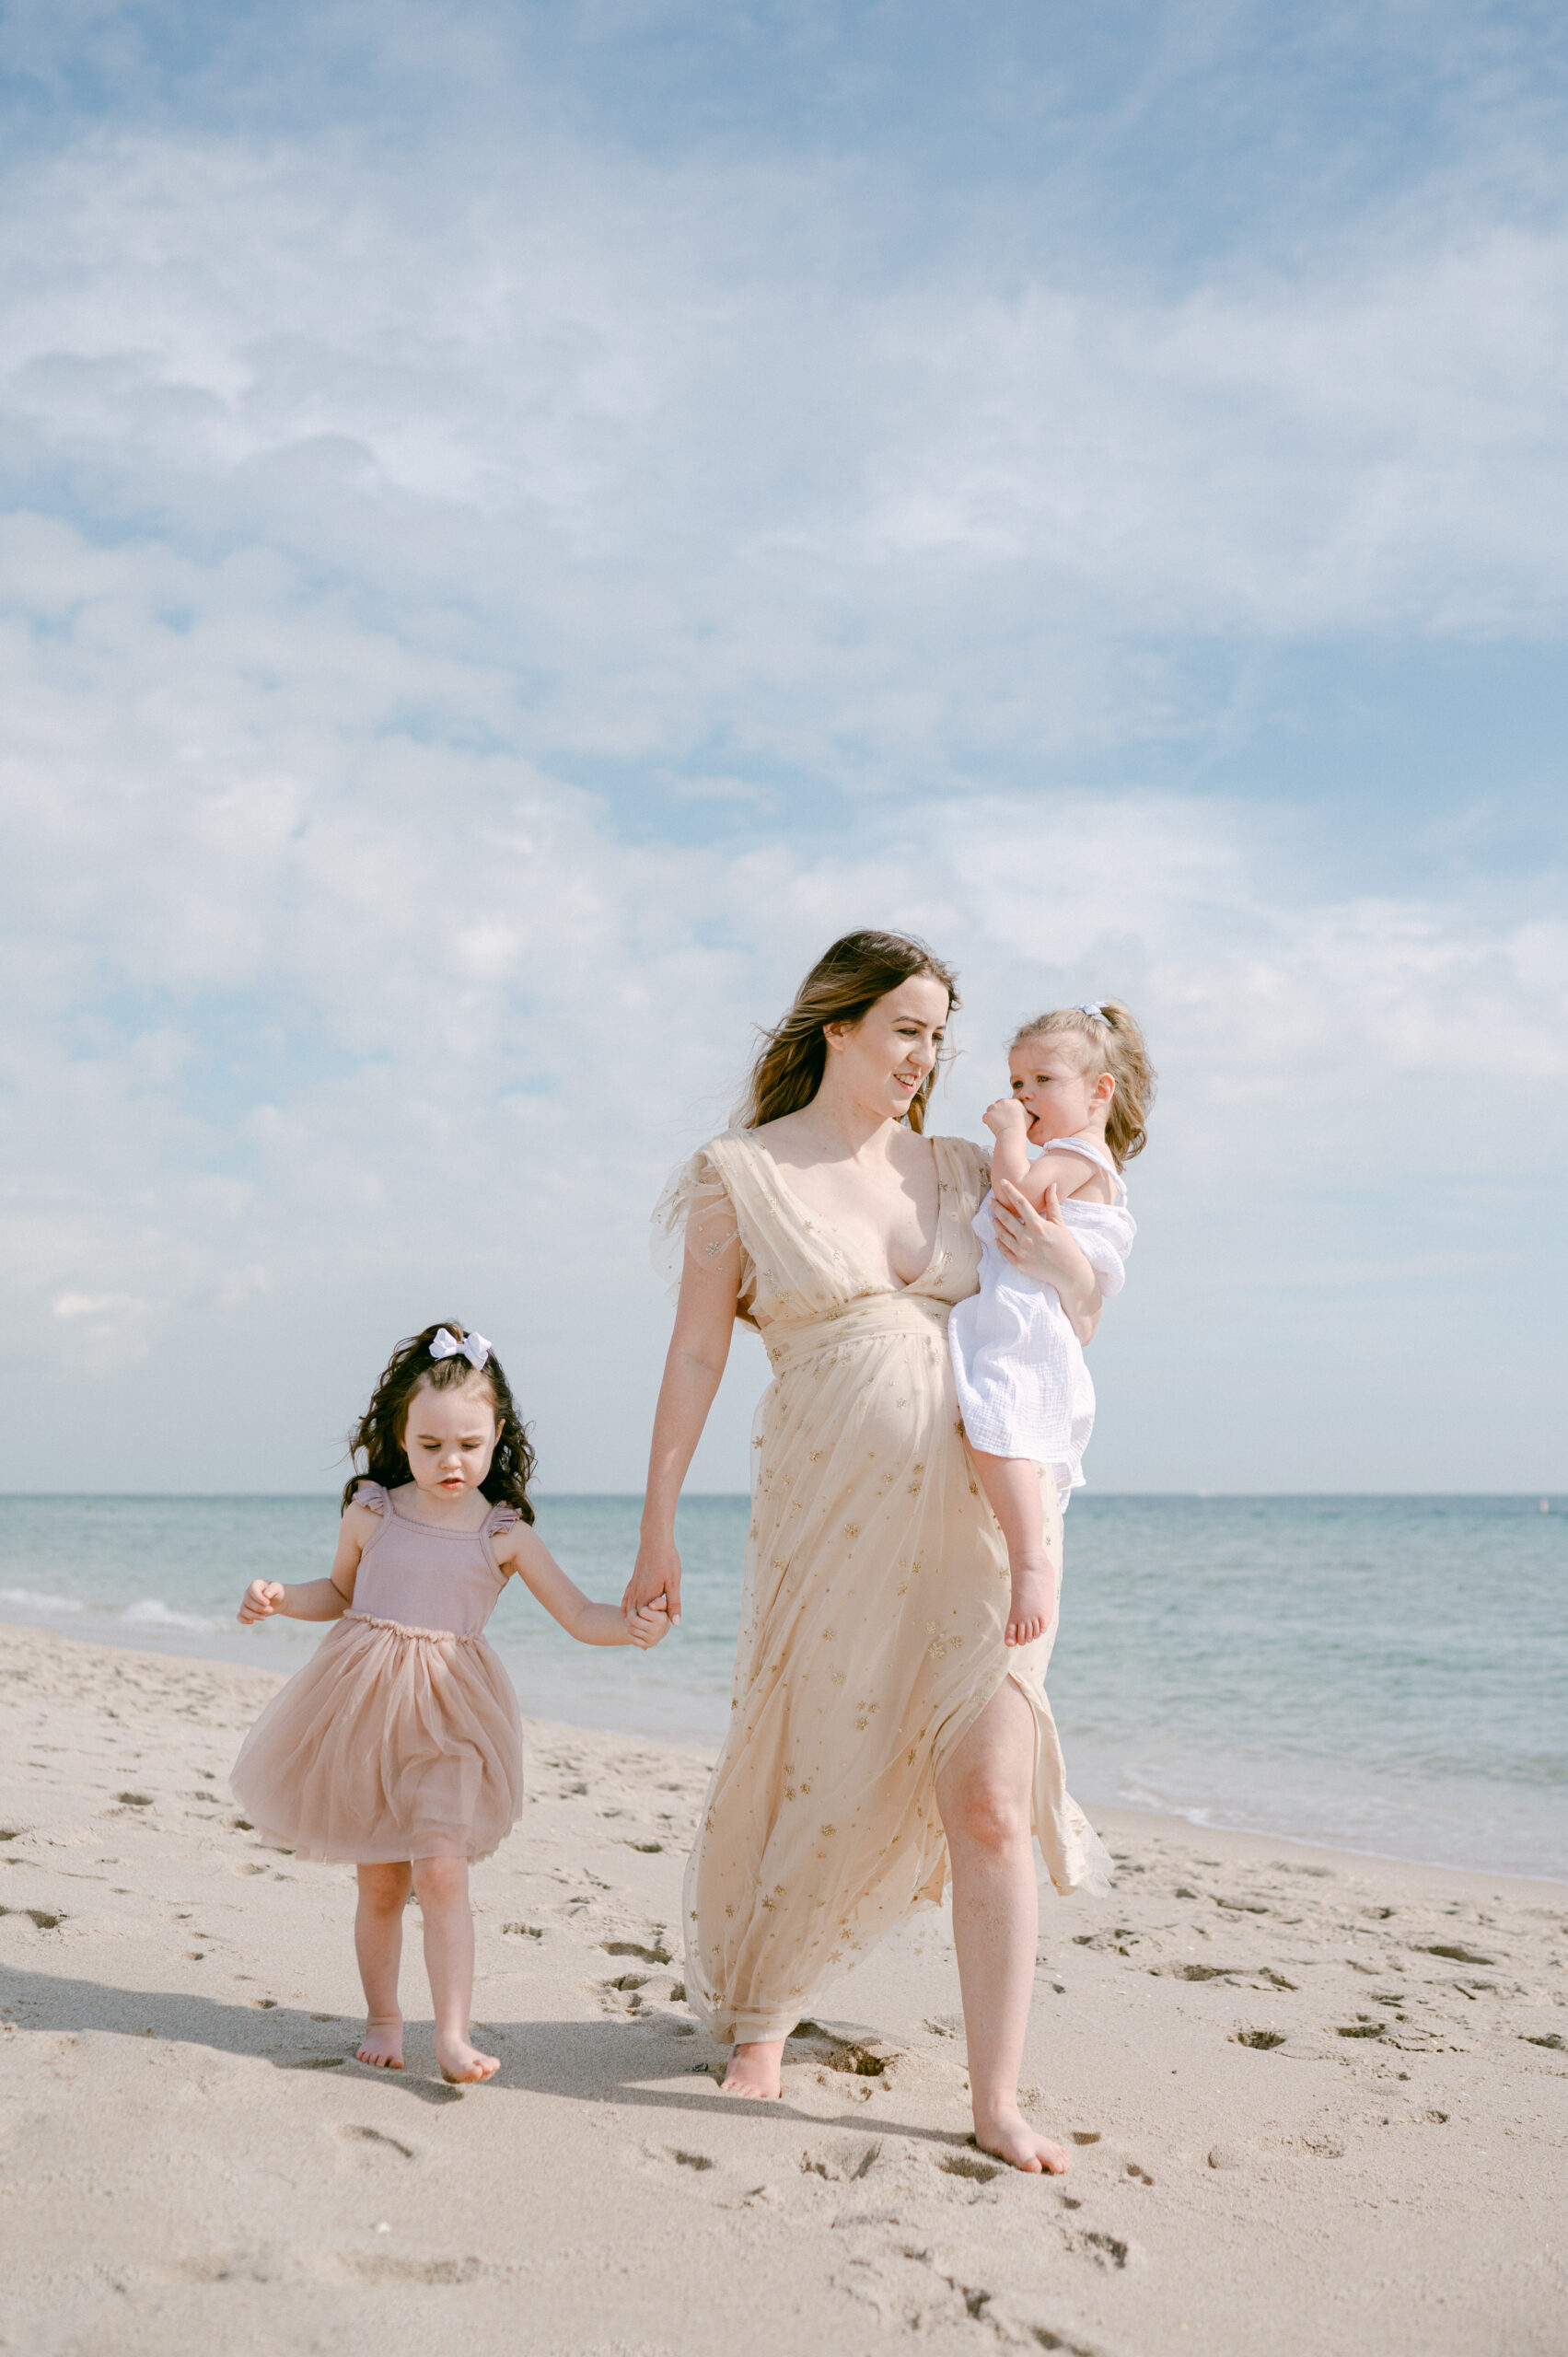 Mon walking on the beach with her two daughters in Miami